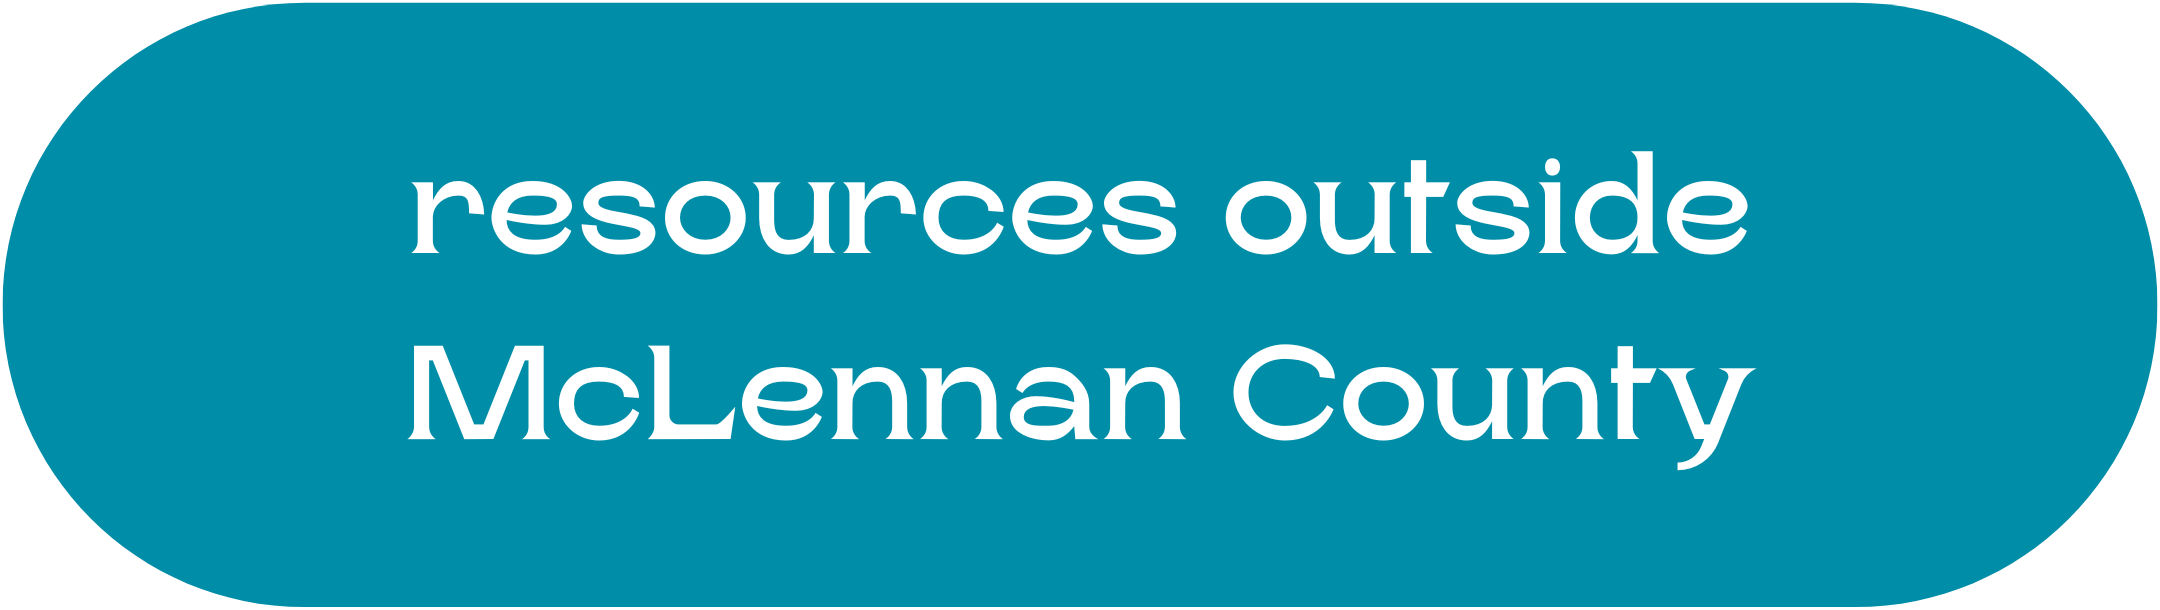 resources-outside-mclennan-county.png